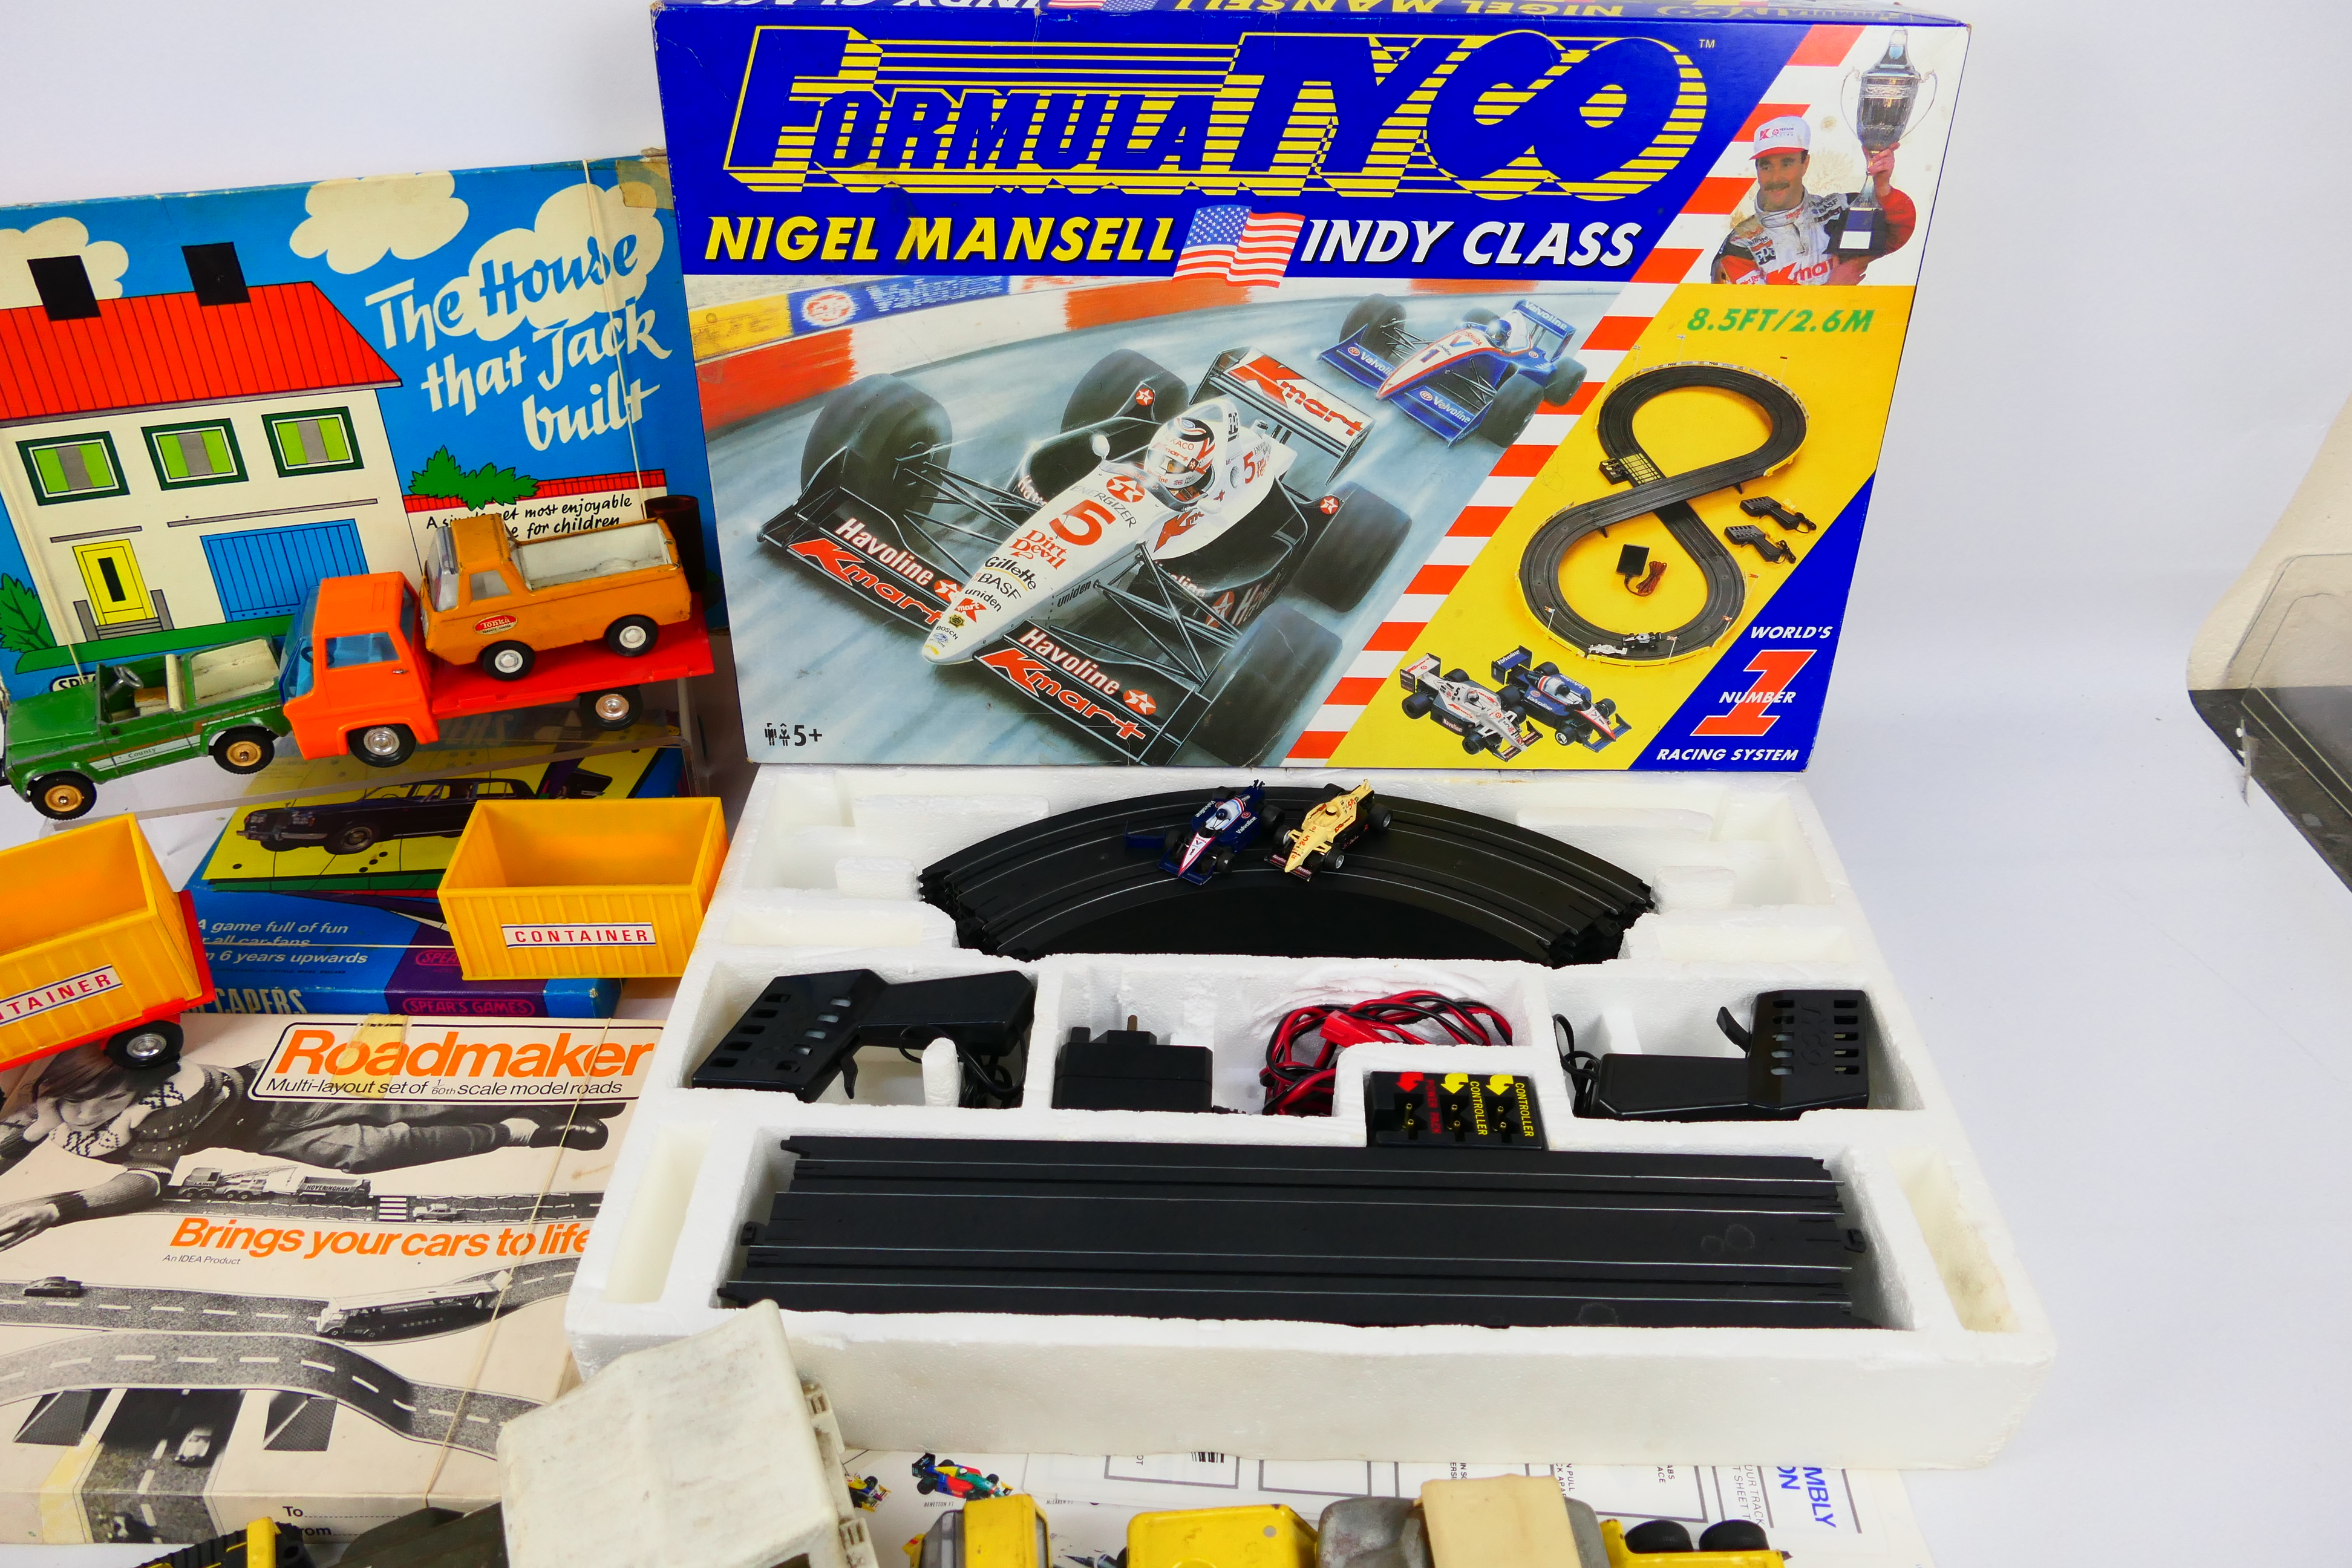 Tyco - Tonka - Spears - A boxed Formula Tyco Nigel Mansell Indy Class set # 6689. - Image 2 of 5